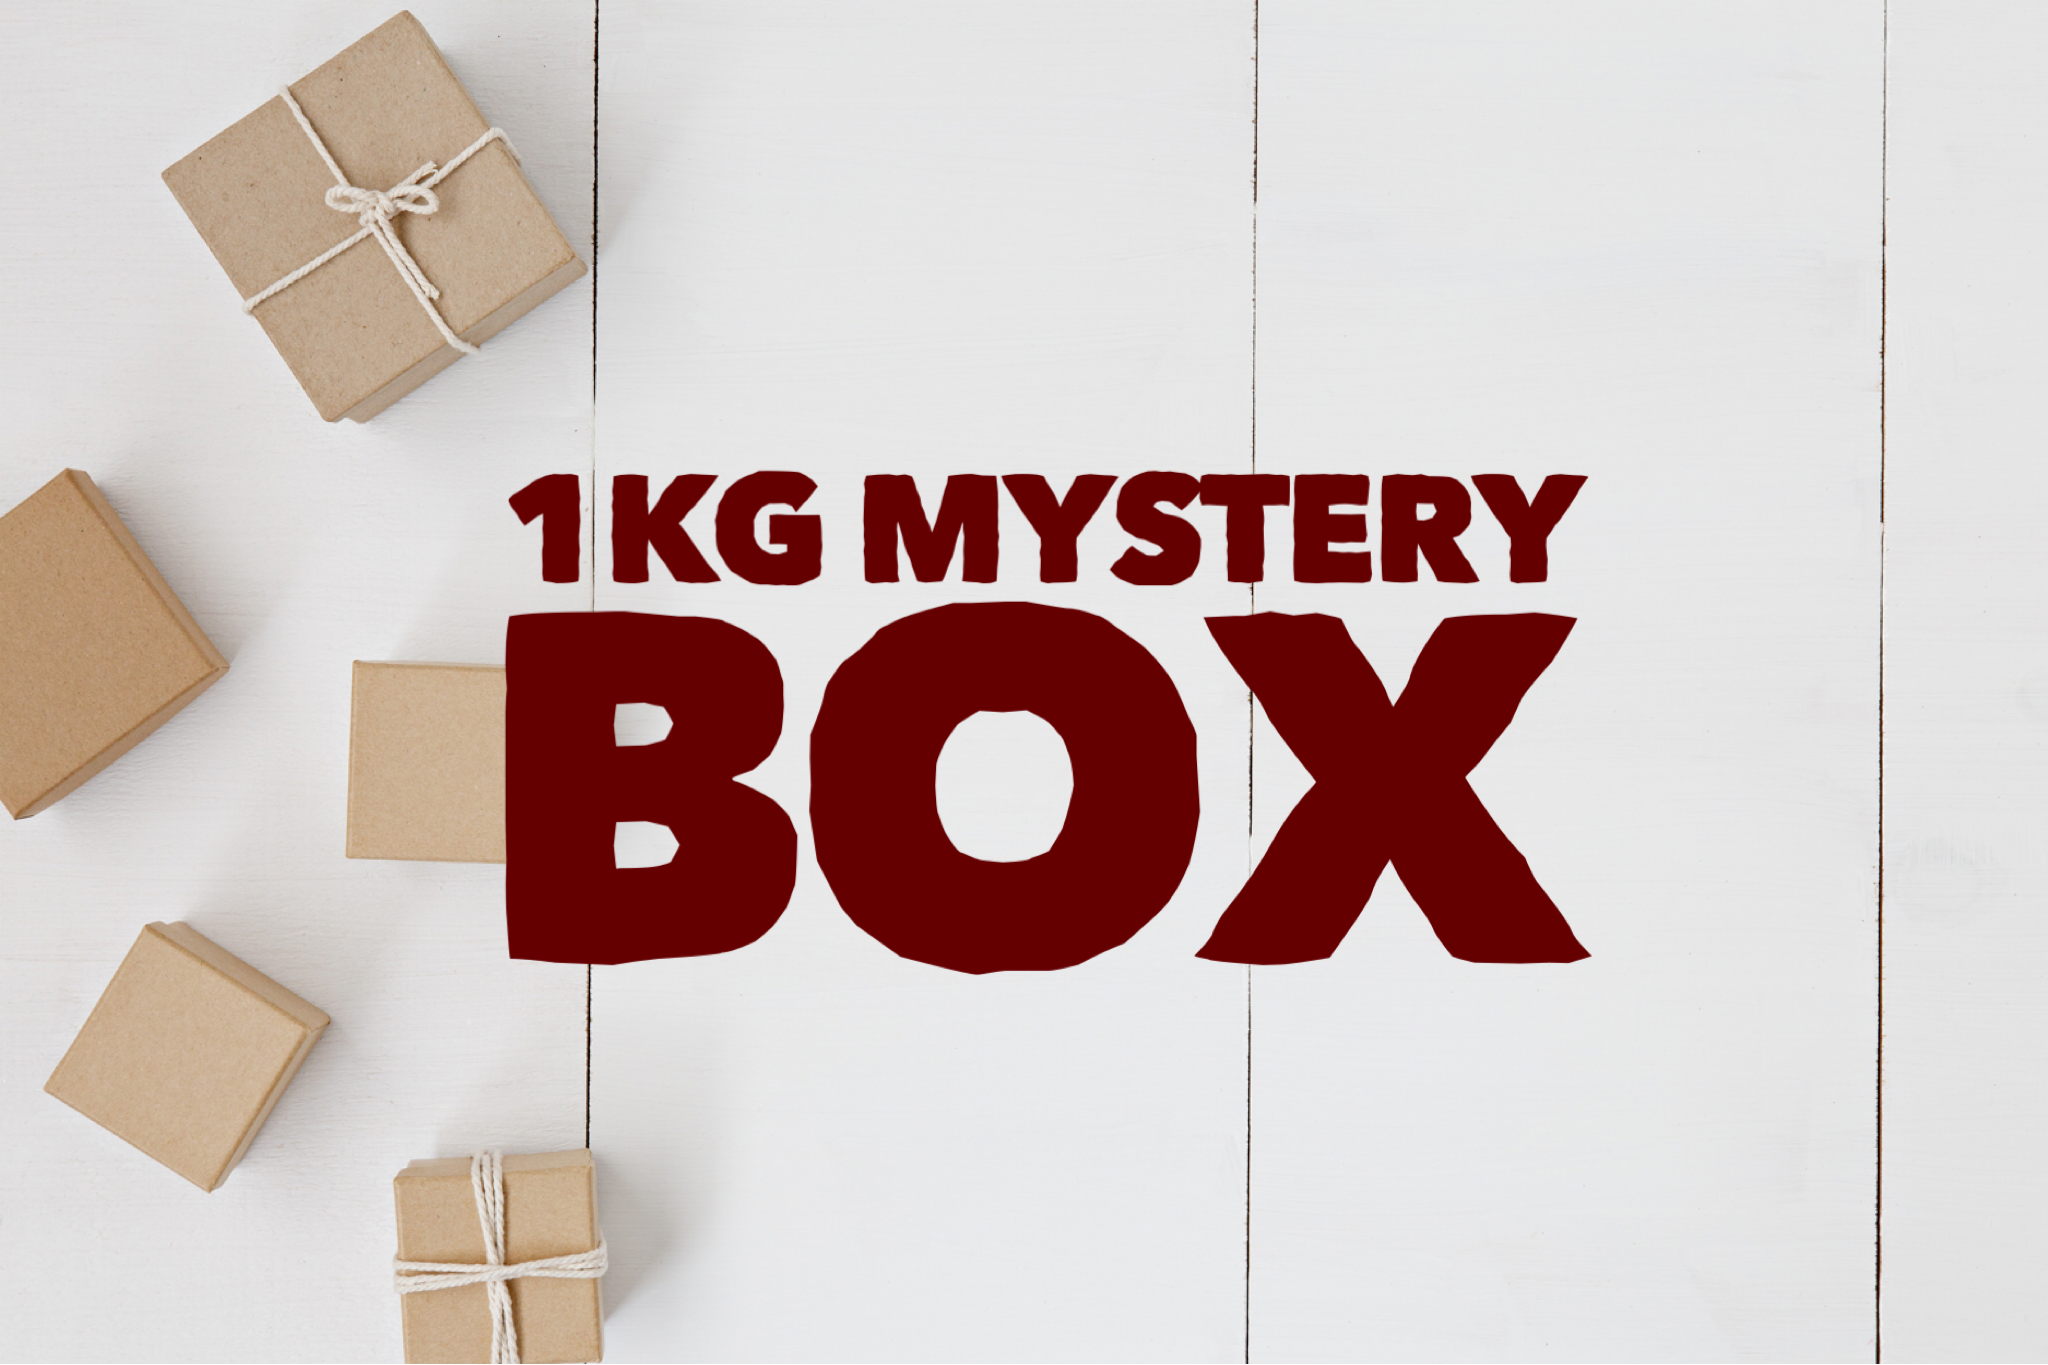 SALE - Mystery 2kg Box! 40% off!!!